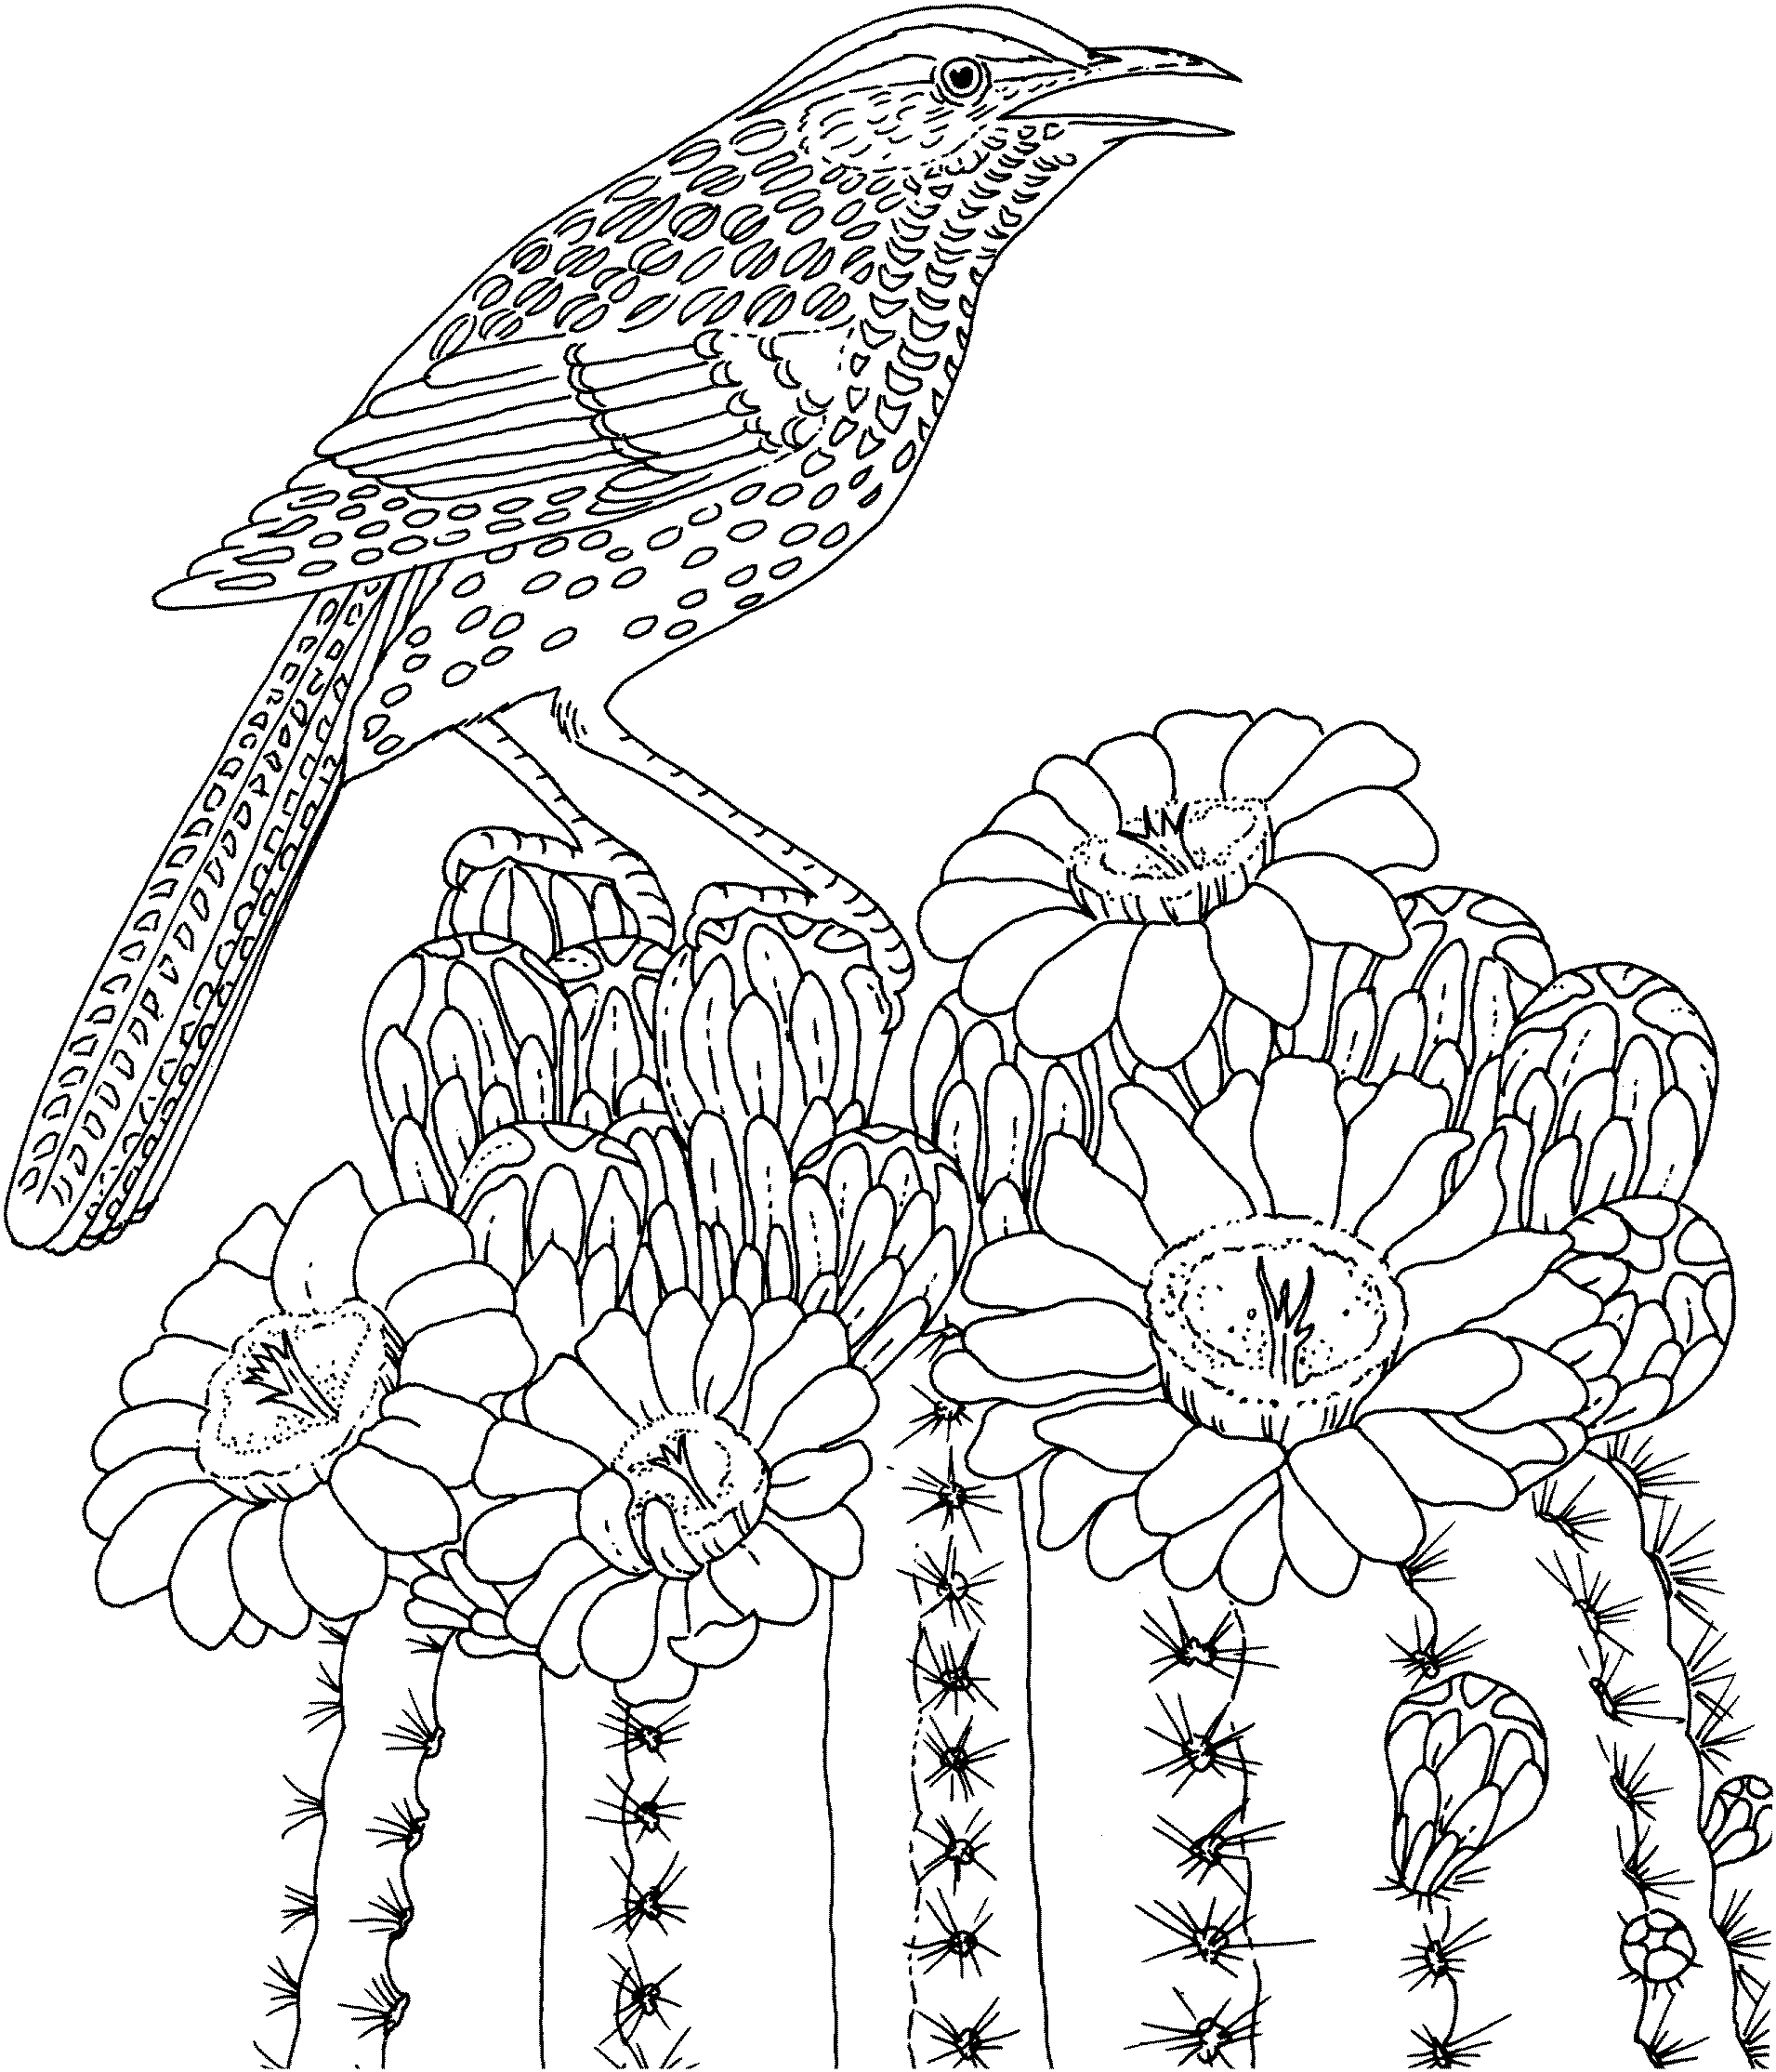 Galleries Related: Hard Coloring Pages , Cool Printable Coloring Pages